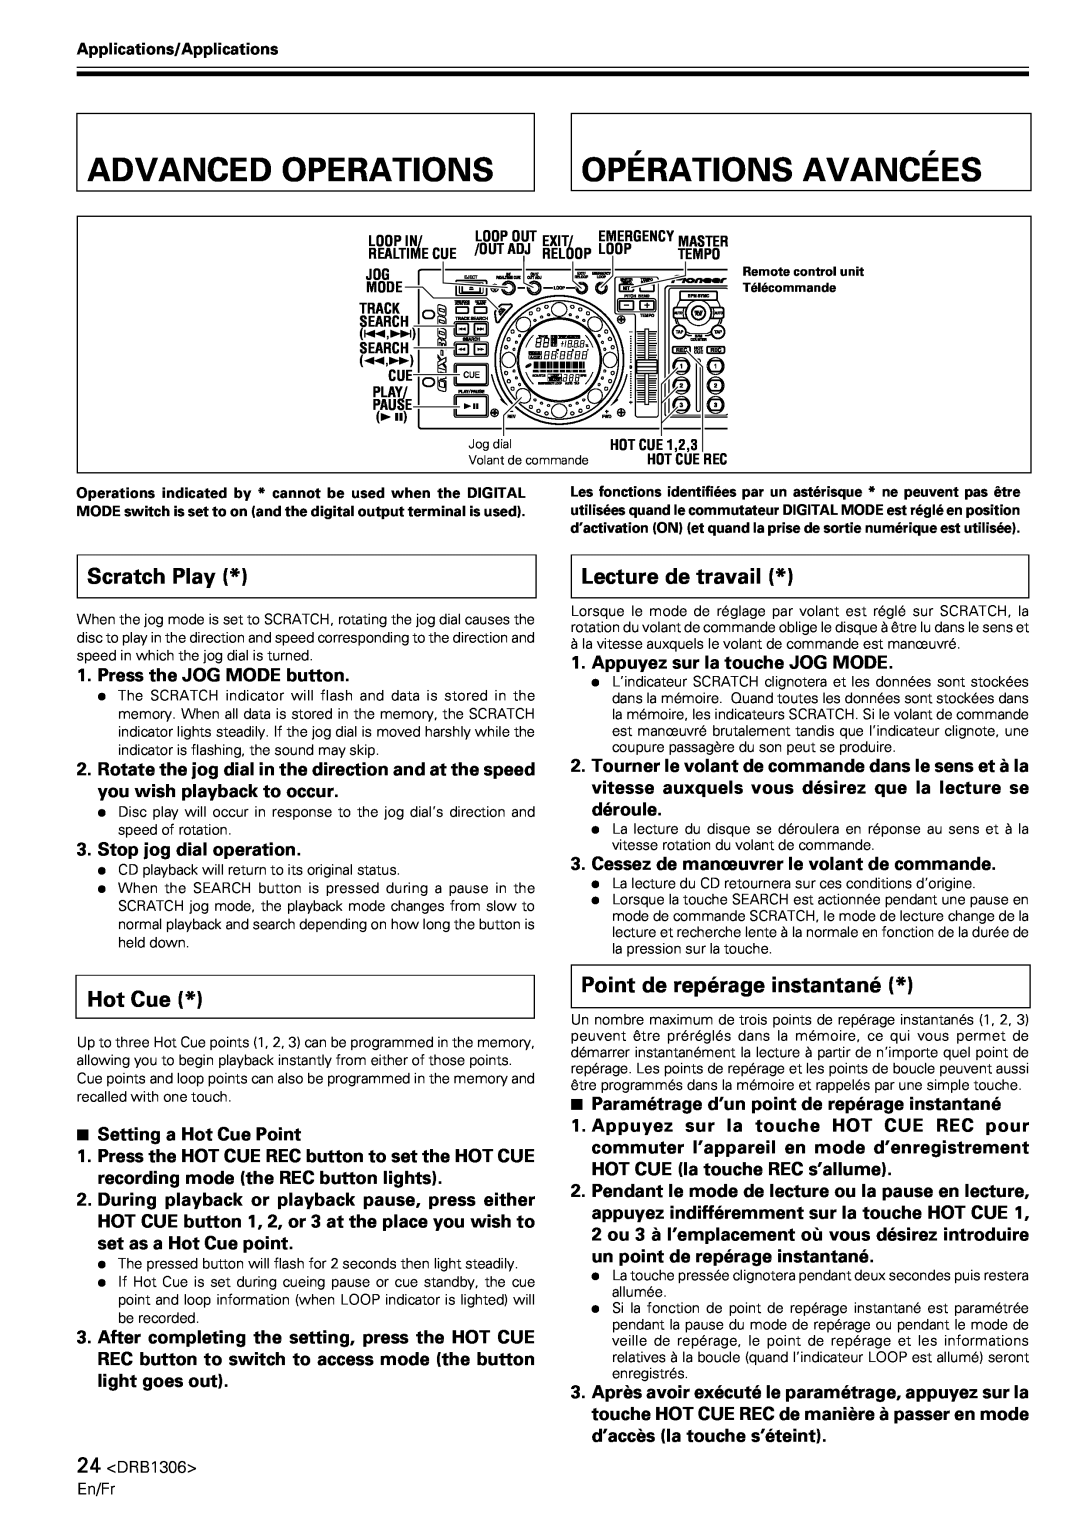 Pioneer CMX-3000 operating instructions Advanced Operations, Opérations Avancées, Scratch Play, Hot Cue, Lecture de travail 